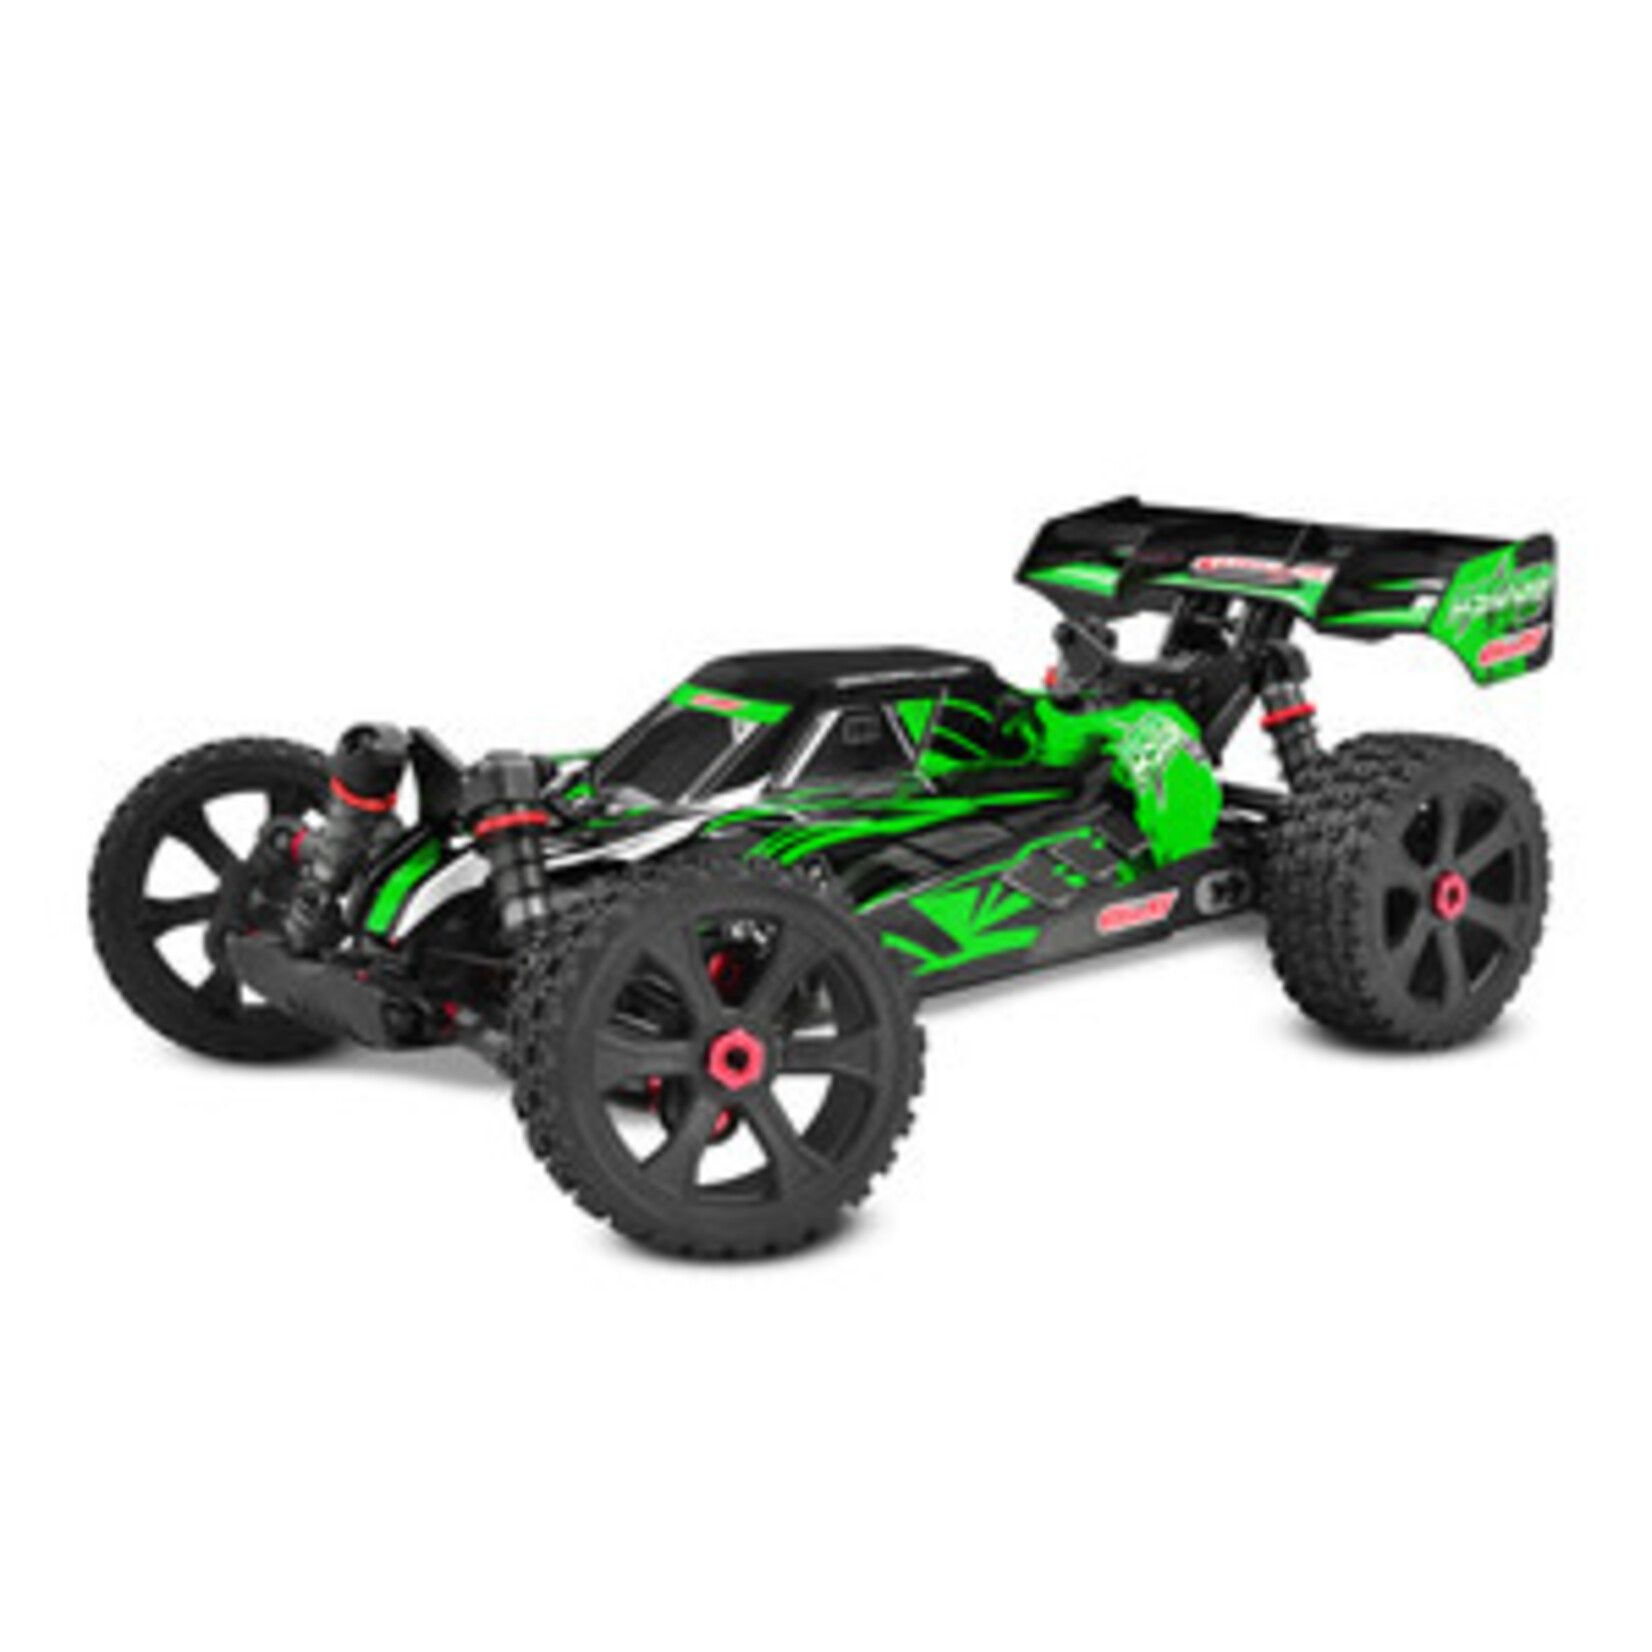 COR00288-G  Asuga XLR 6S RTR Racing Buggy - Red, Large Scale